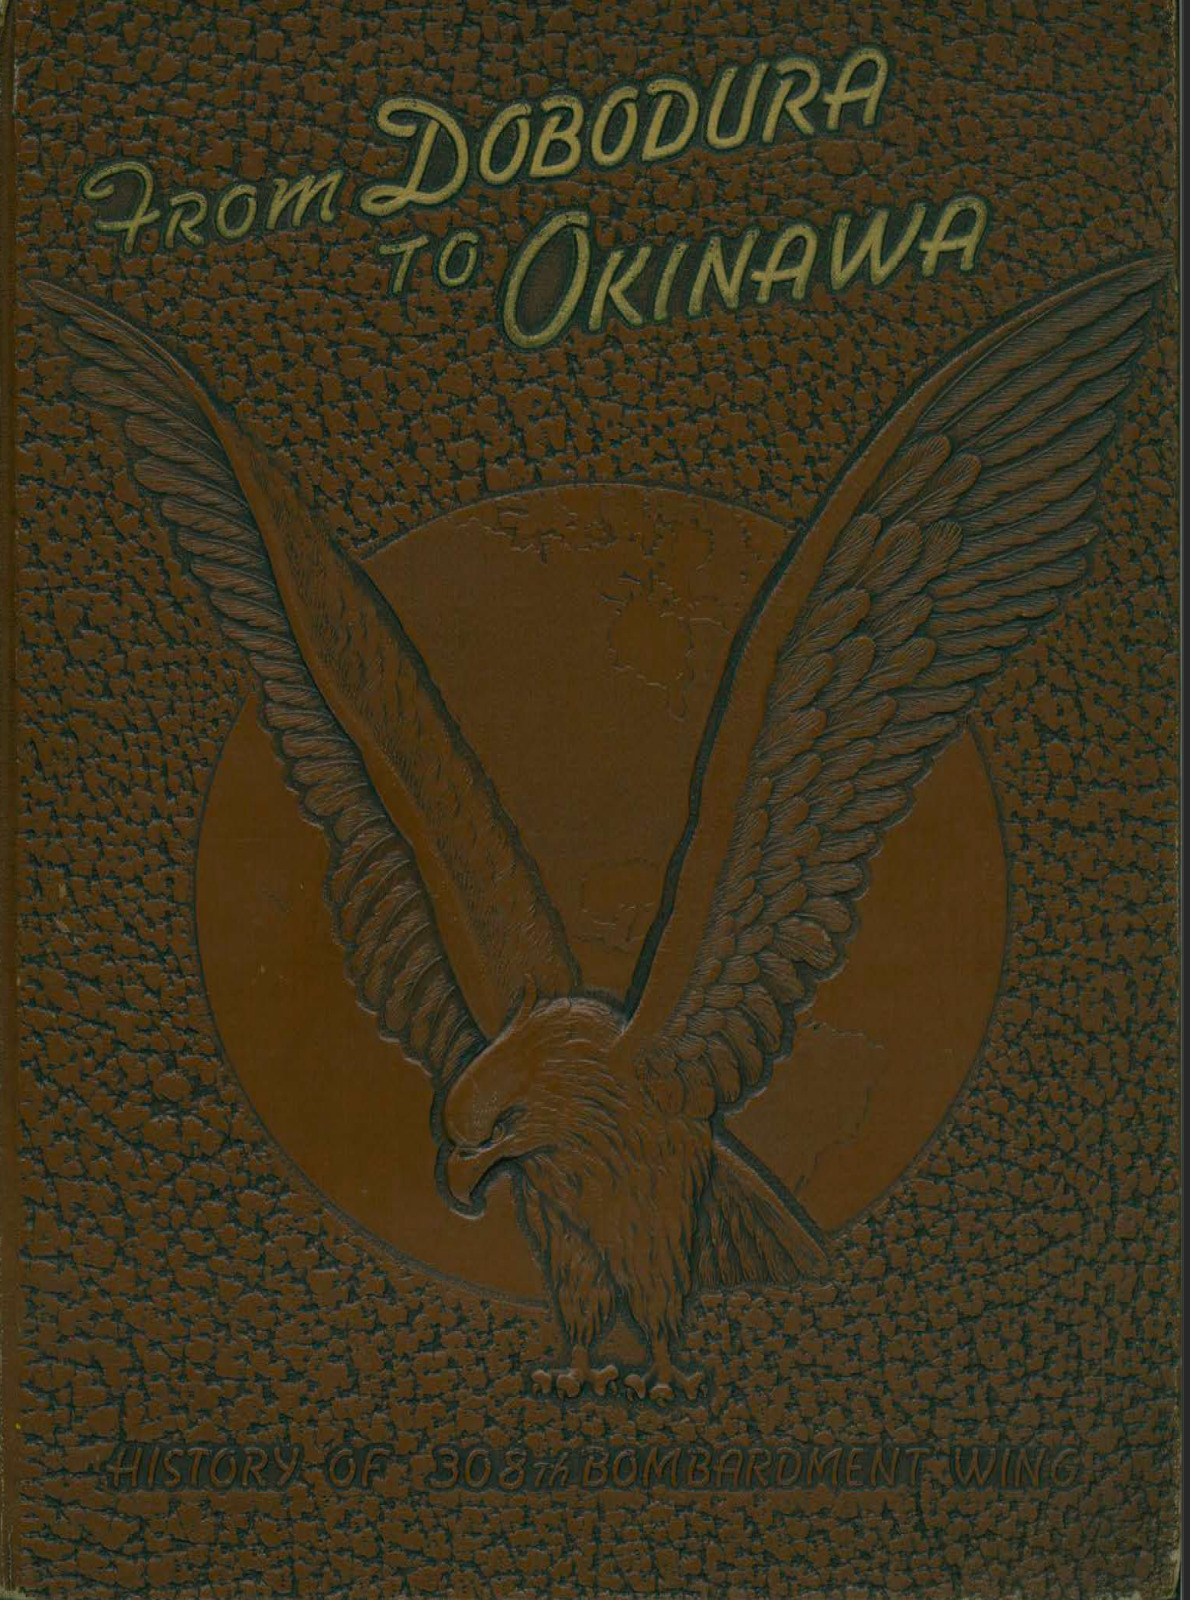 195 Page 308th Bombardment Wing Dobodura to Okinawa AAF History Book on Data CD